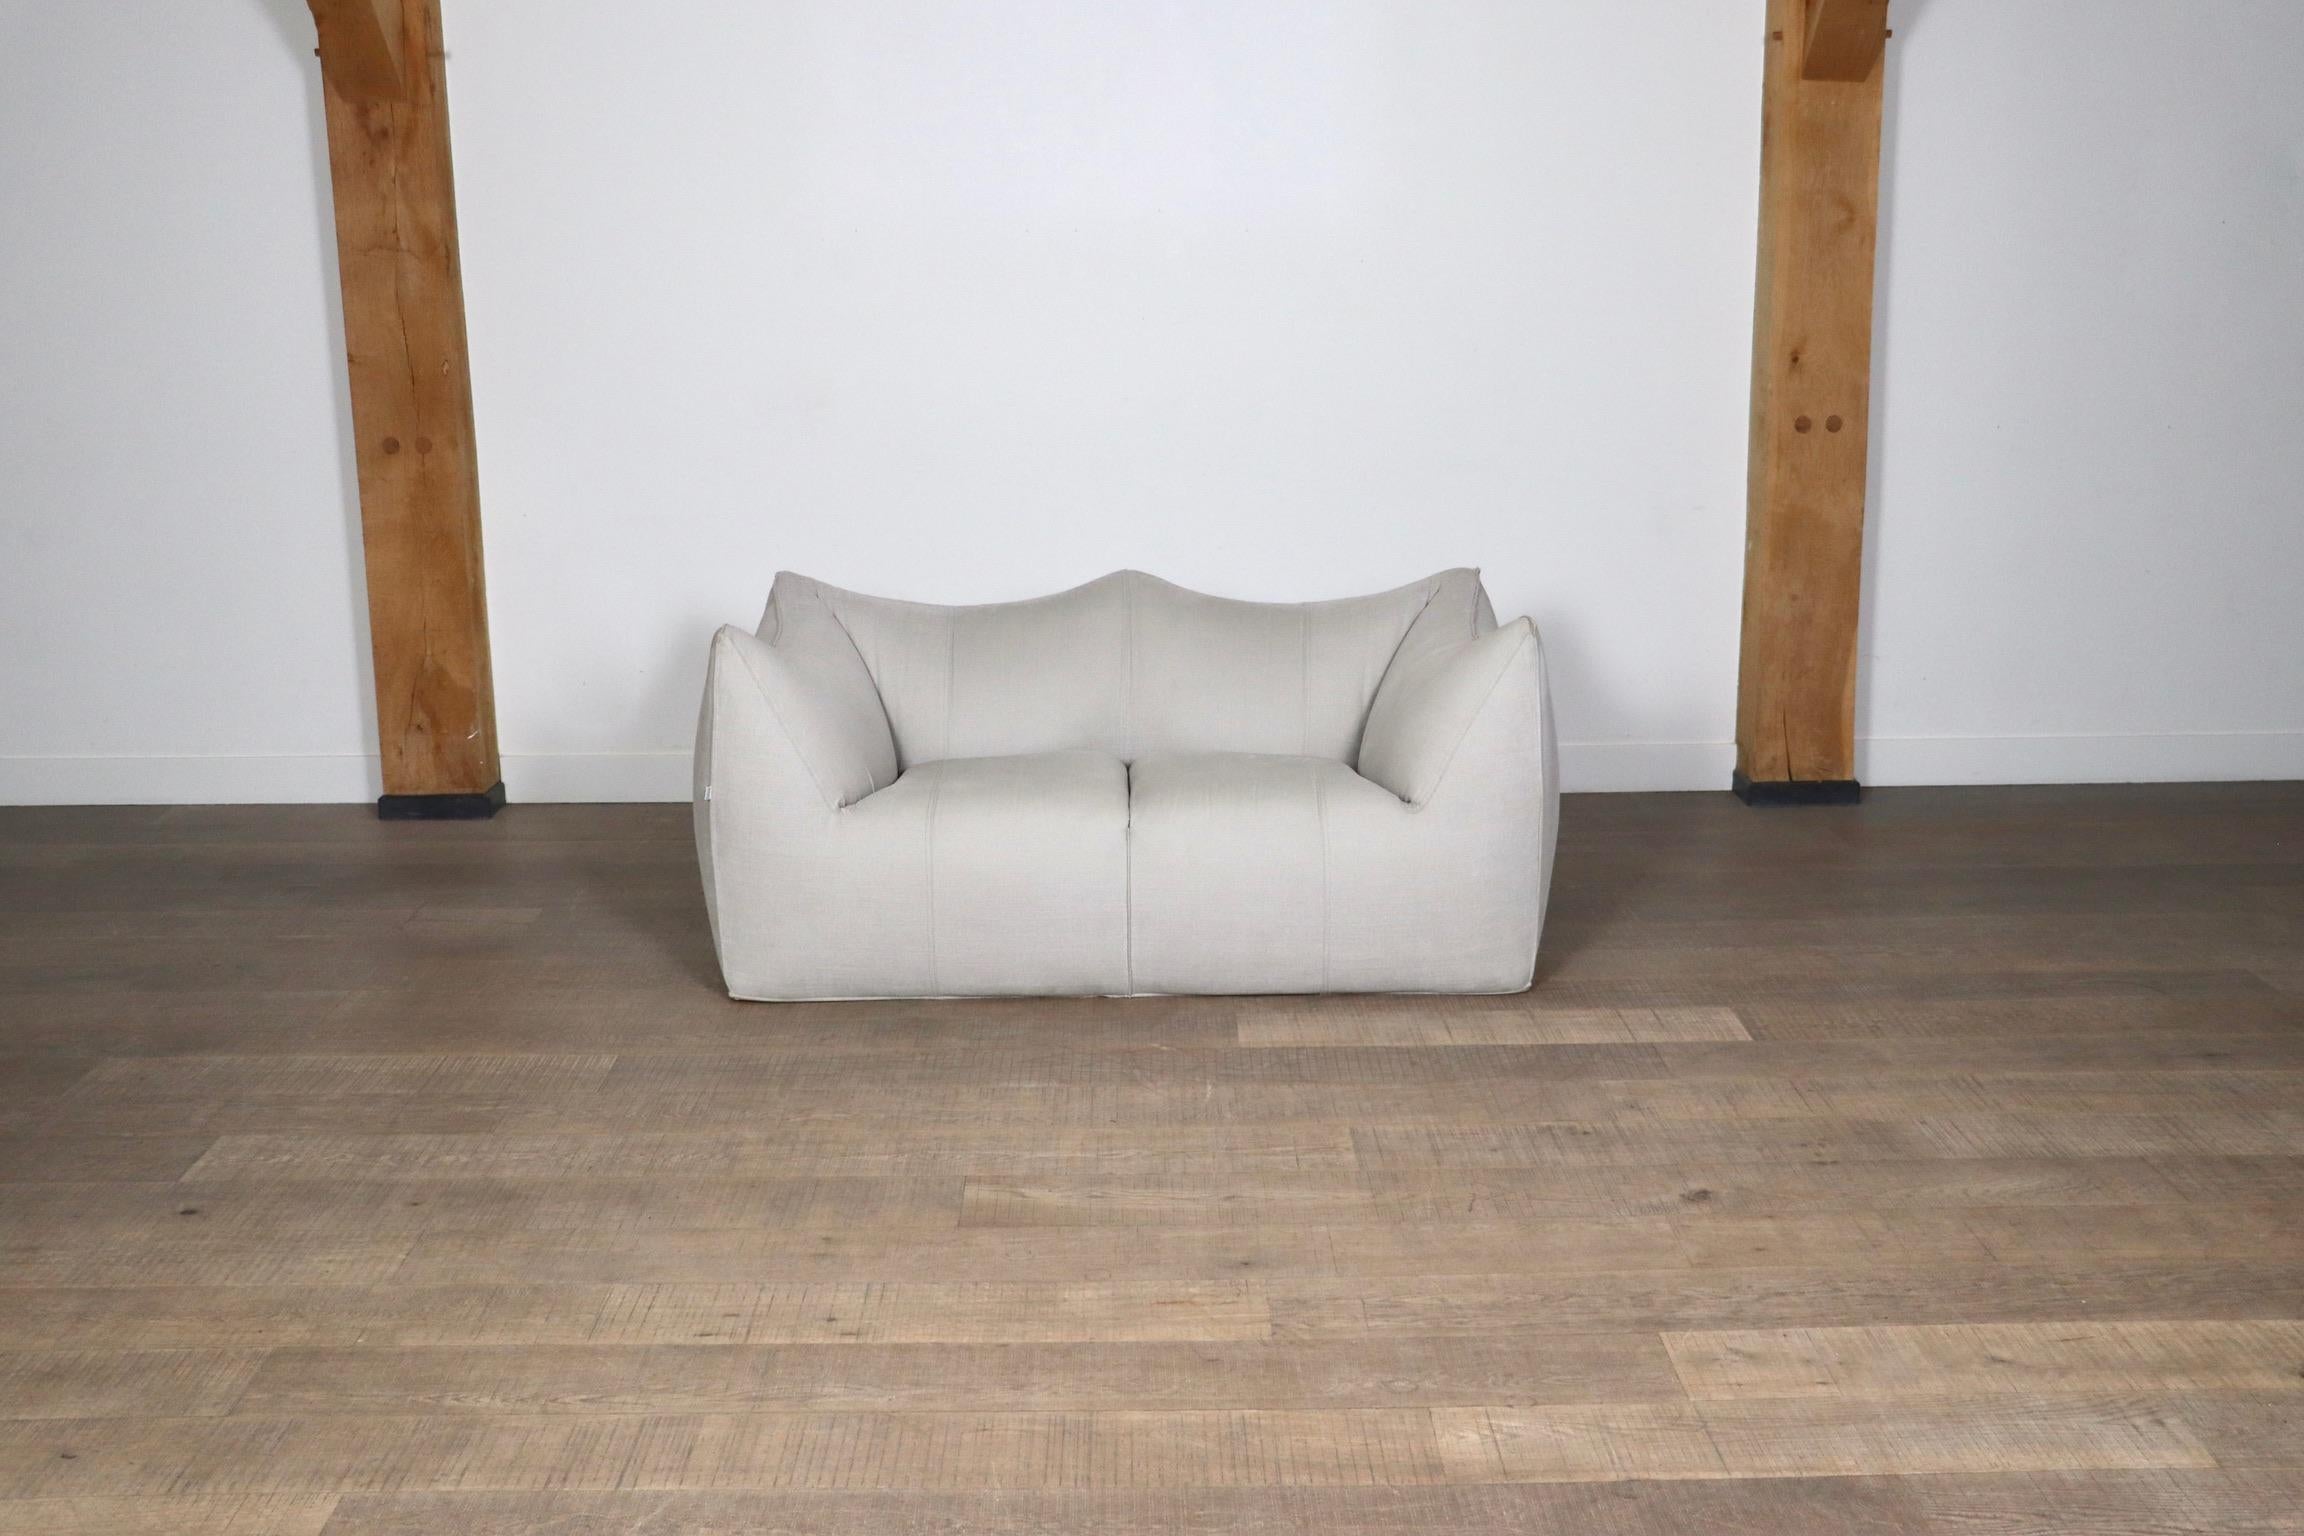 Stunning “Le Bambole” two seater sofa designed by Mario Bellini for B & B Italia in the 1970s. A beautiful edition in high quality off white linen fabric, which adds a nice texture to this comfortable and “chunky” design. Besides the outstanding